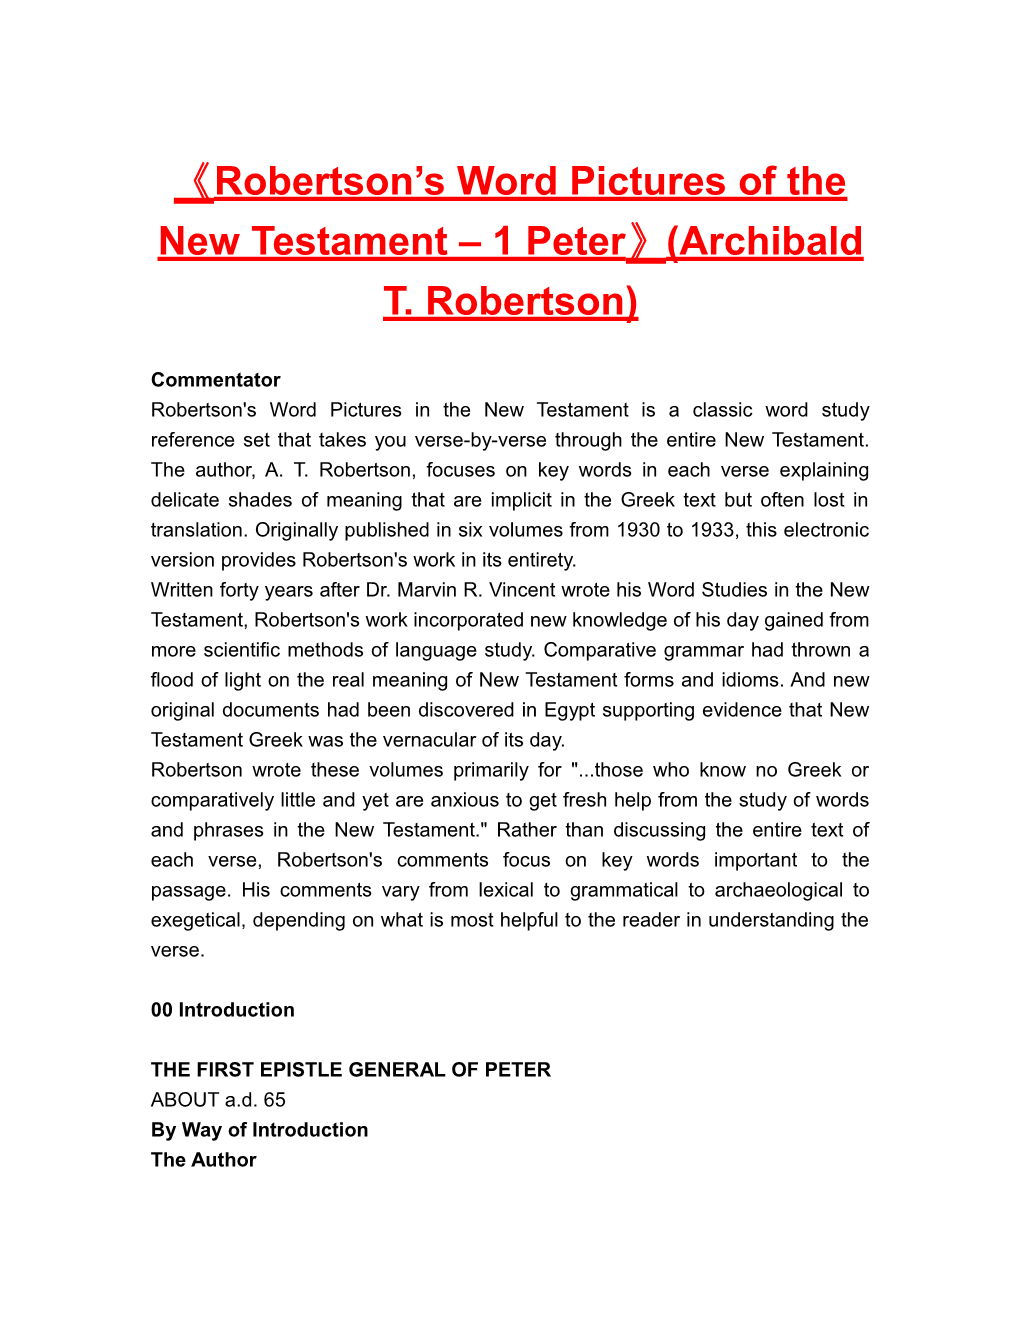 Robertson S Word Pictures of the New Testament 1 Peter (Archibald T. Robertson)